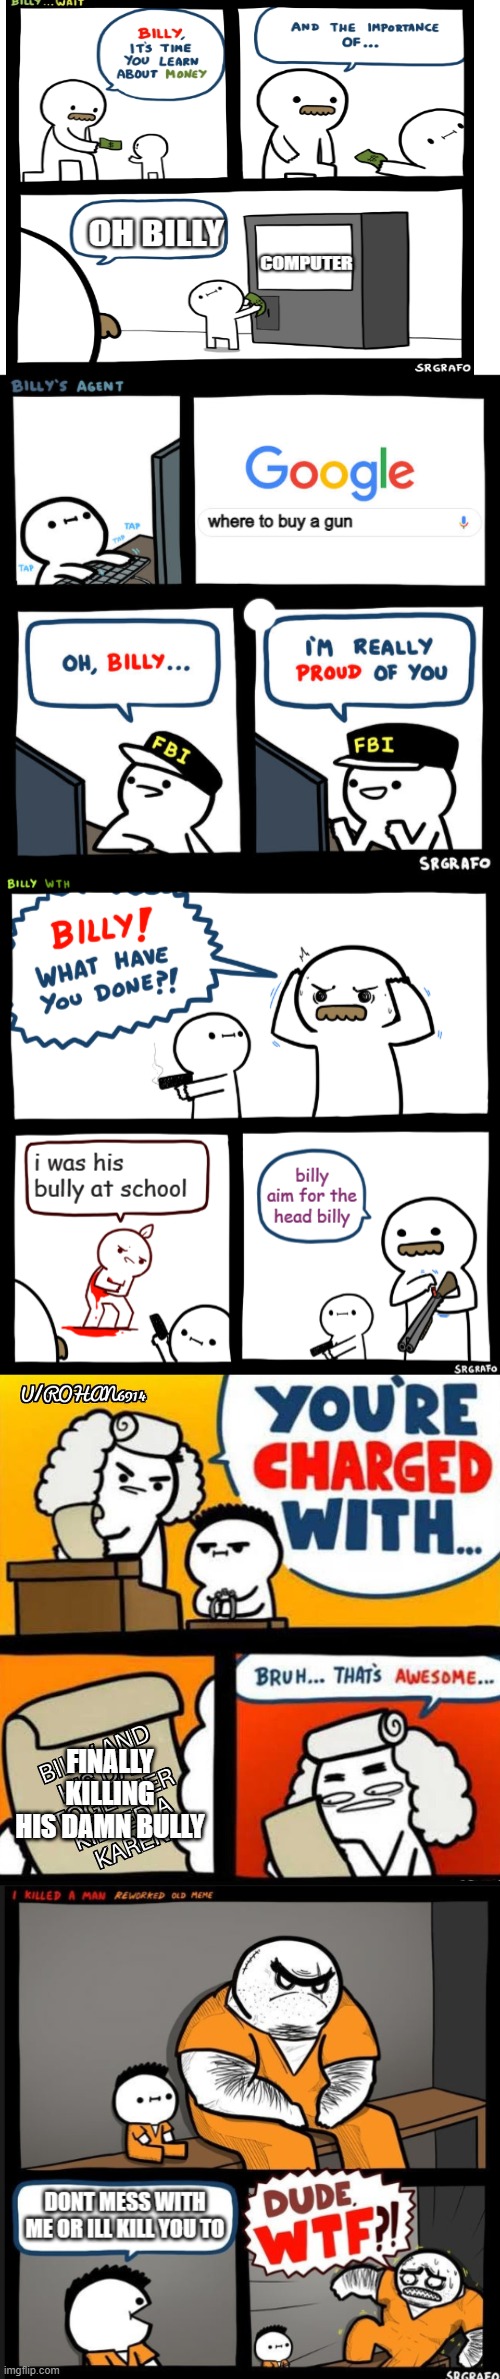 the true story of billy this took so long to make | FINALLY KILLING HIS DAMN BULLY | image tagged in blank white template,billy,true story,long meme,not really,why are you reading this | made w/ Imgflip meme maker